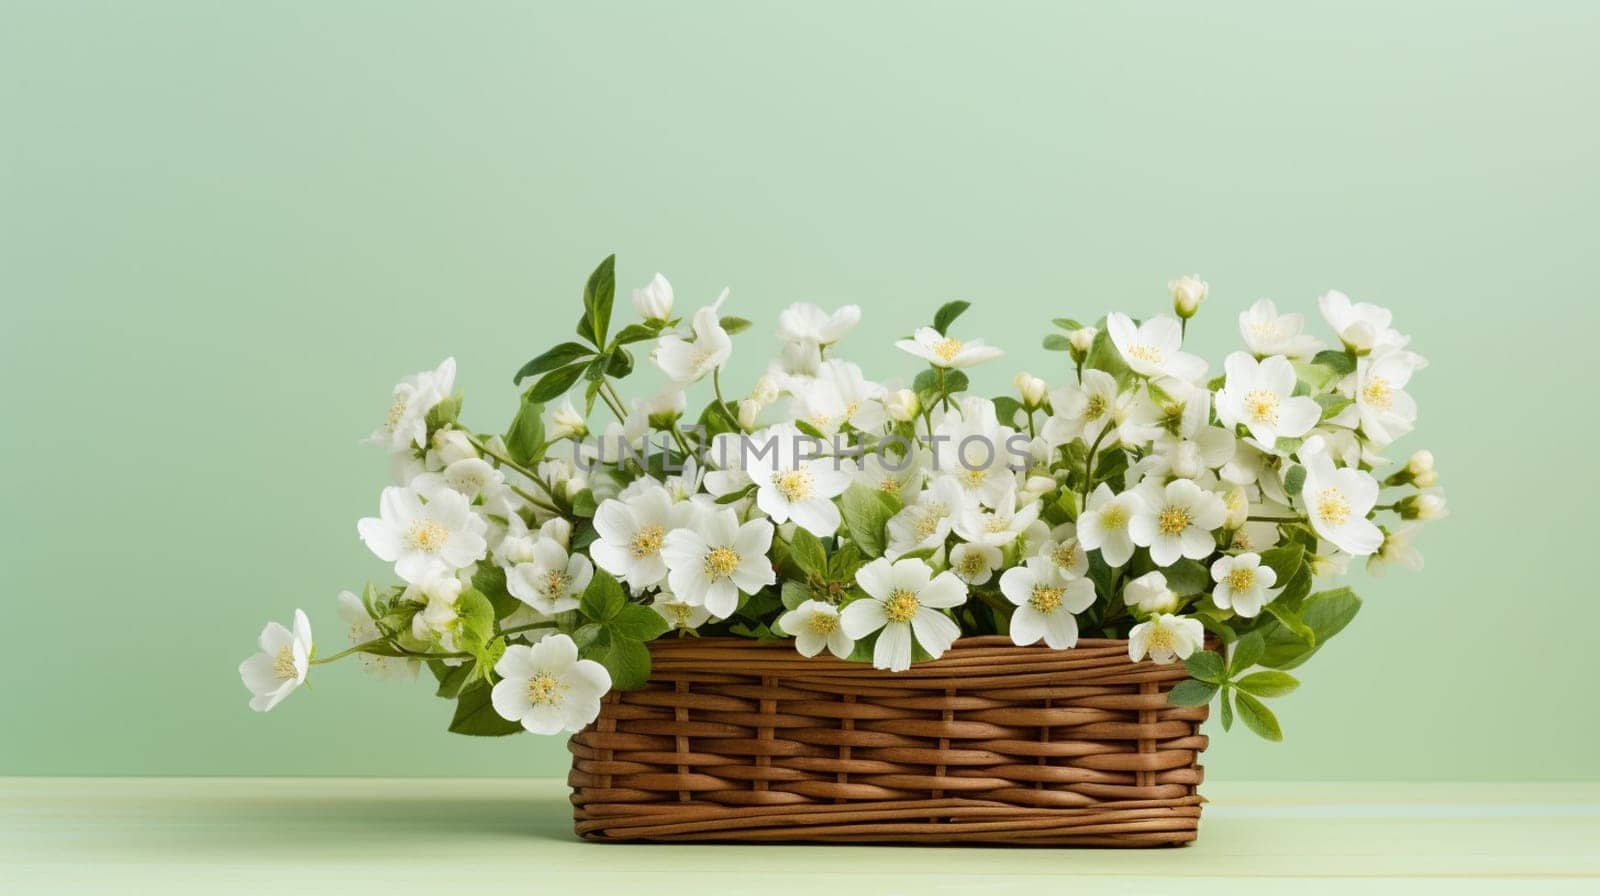 Basket of white flowers on wooden surface against green background by kizuneko